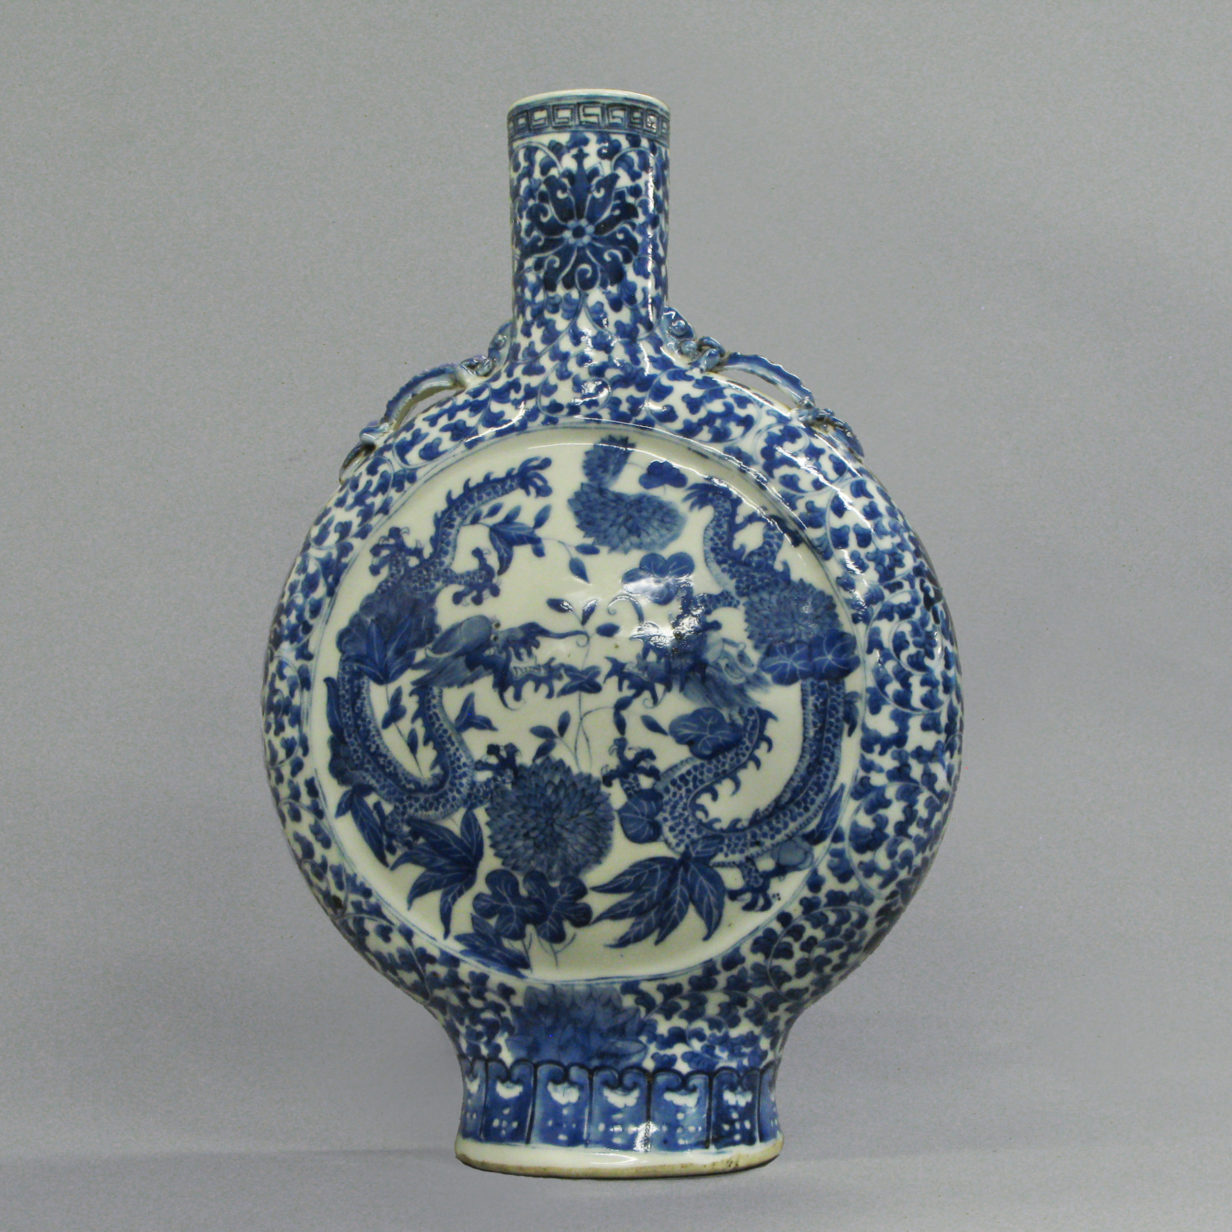 A blue and white porcelain moon flask